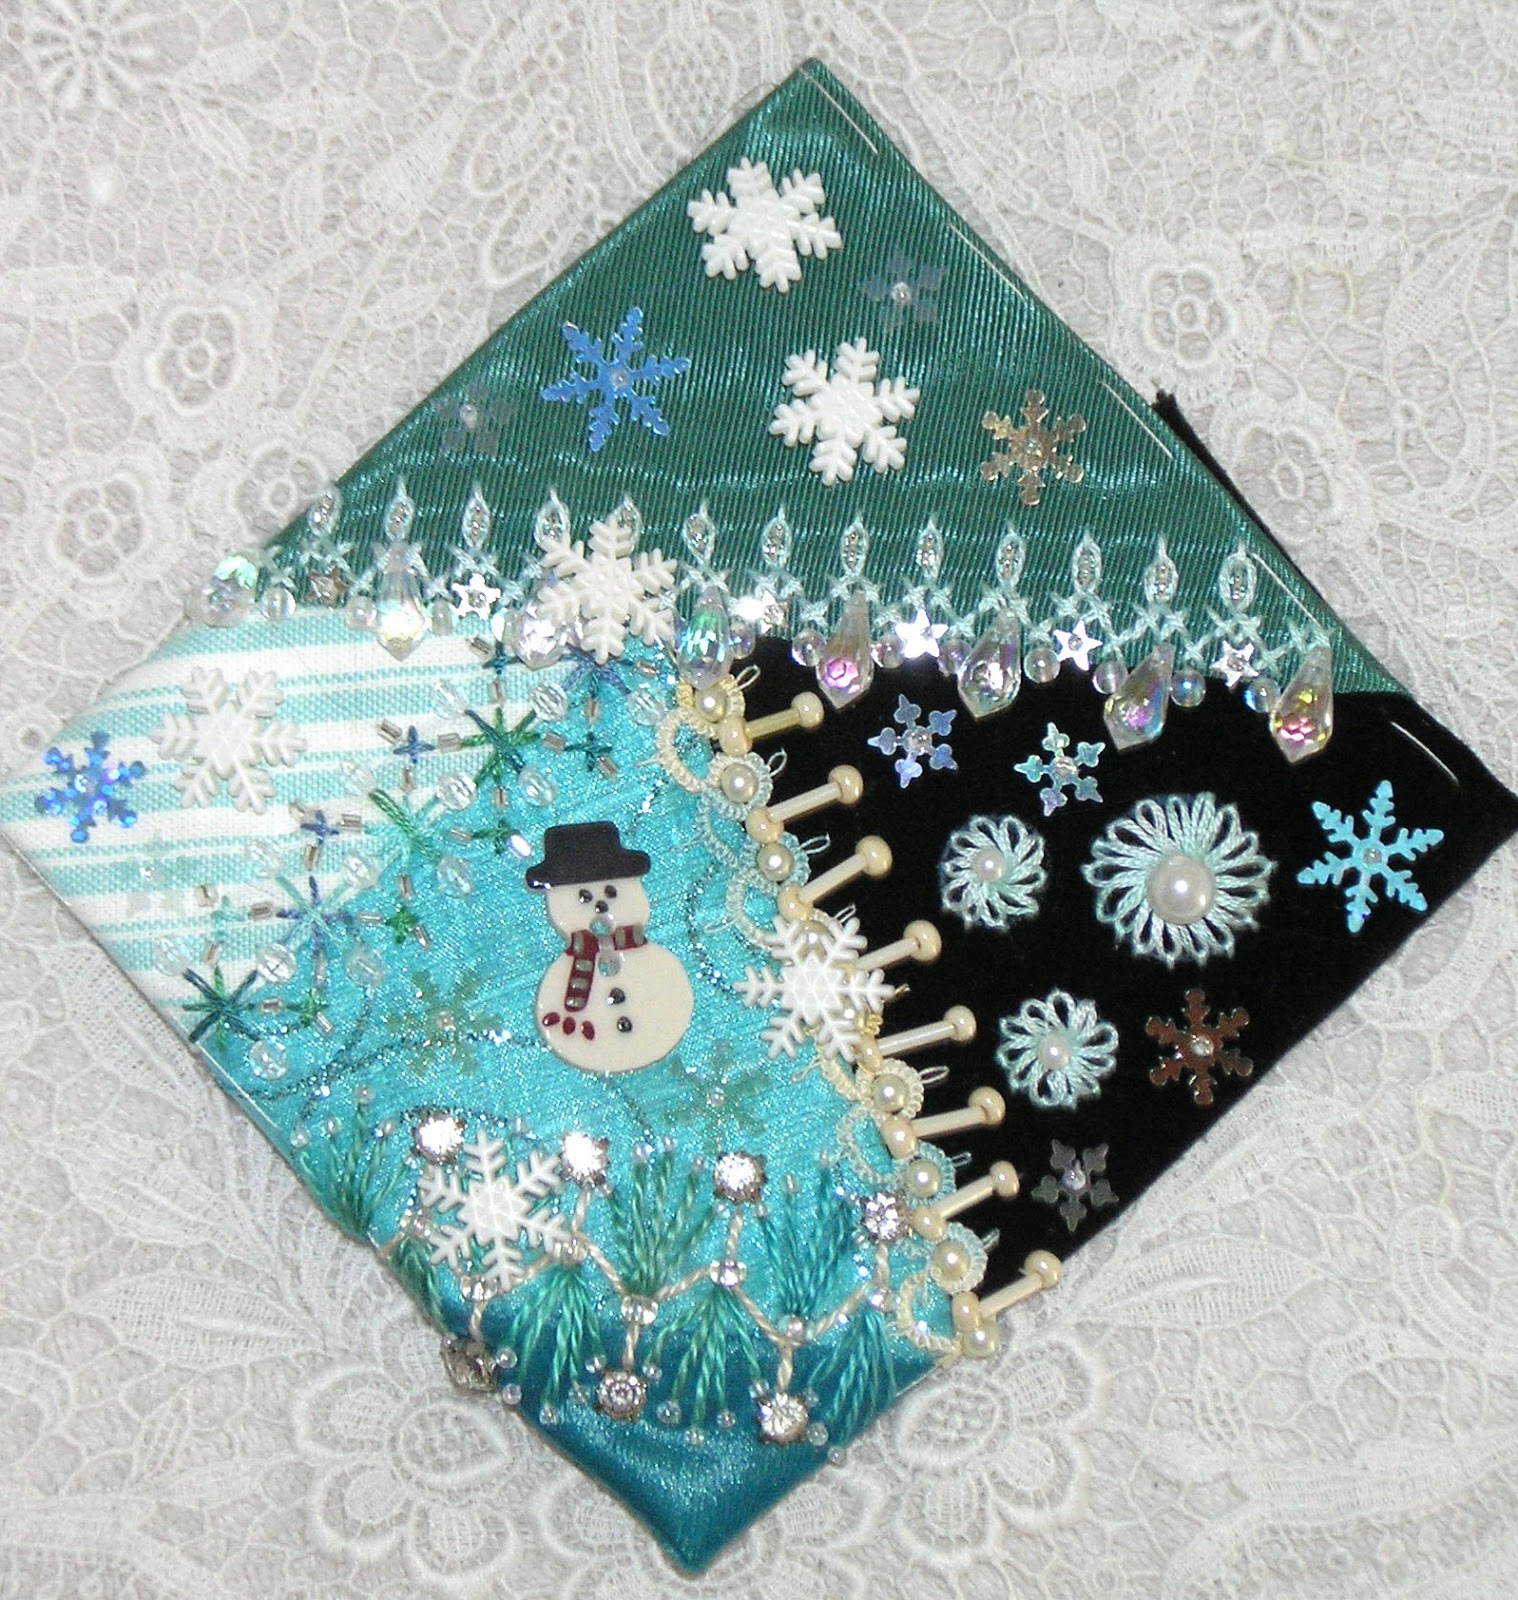 ... of Kitty and Me Designs: Crazy Quilt Blocks for Christmas Ornaments